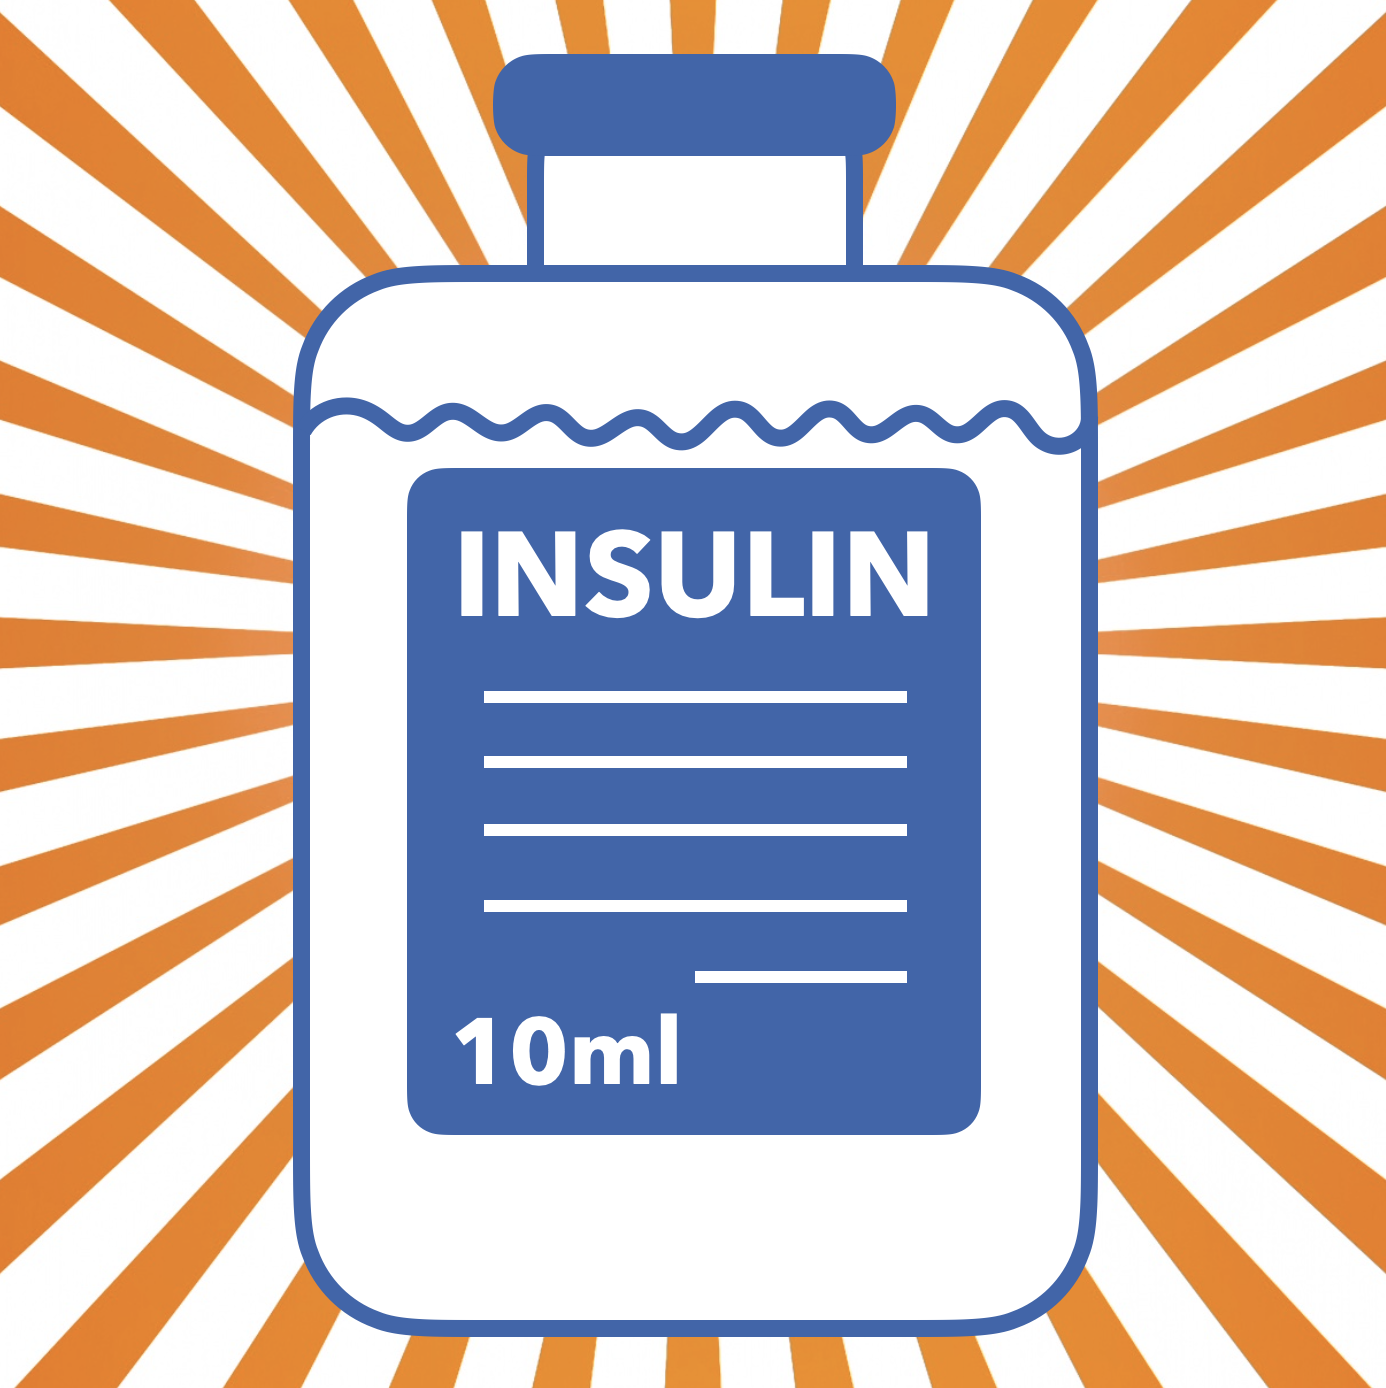 JDRF Announces Manufacture of Affordable Insulin.